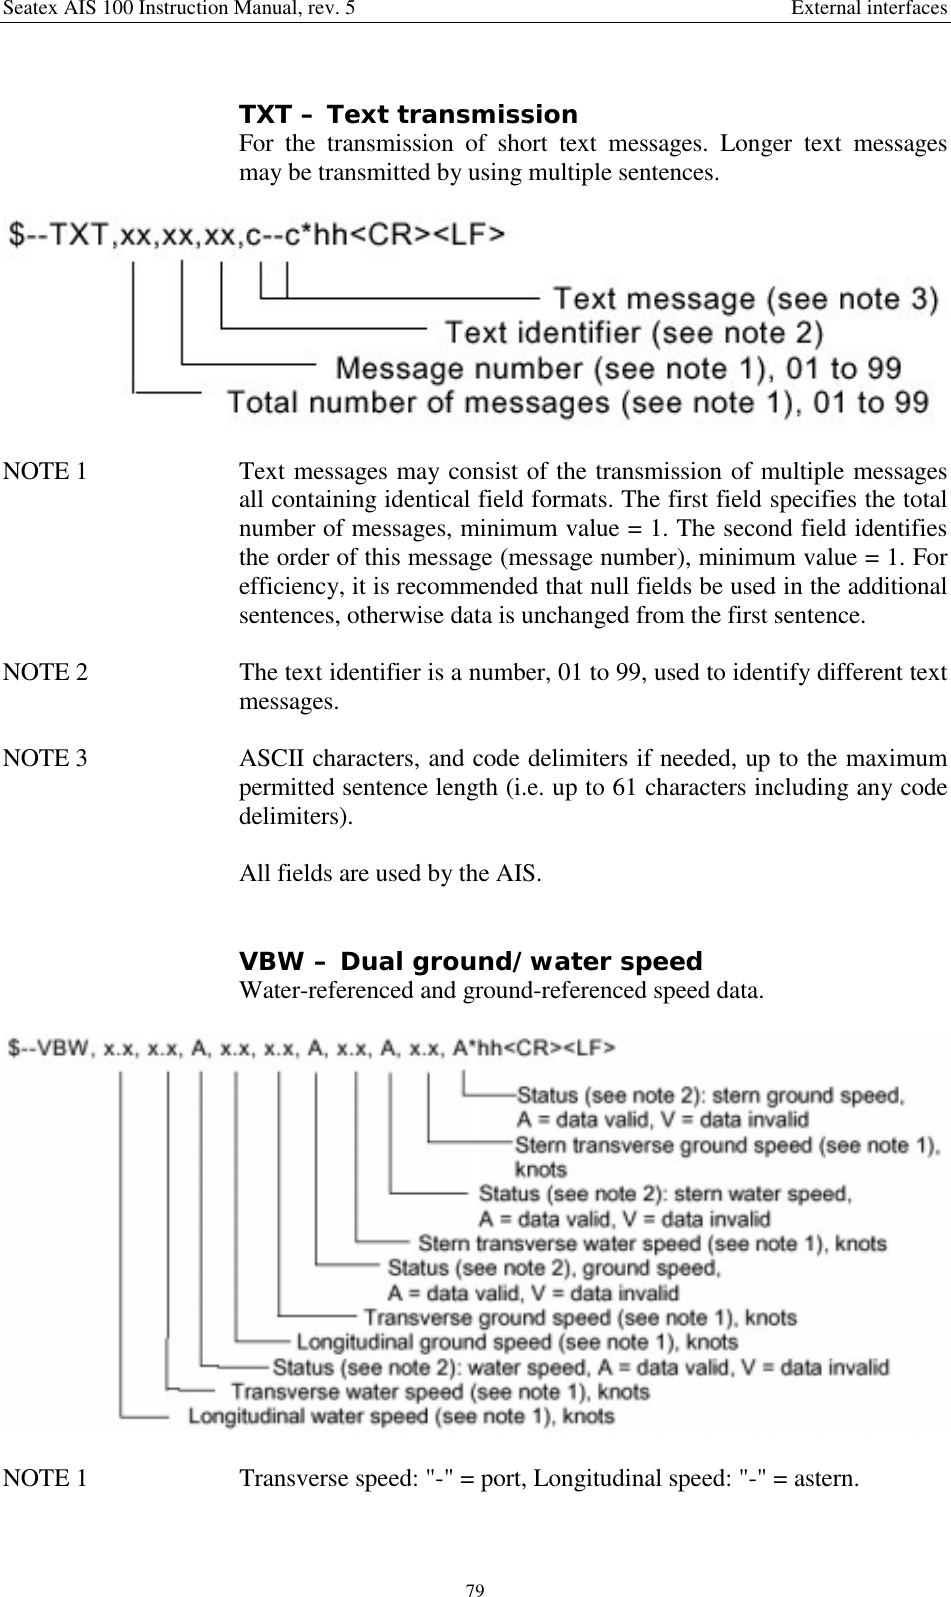 Seatex AIS 100 Instruction Manual, rev. 5 External interfaces79TXT – Text transmissionFor the transmission of short text messages. Longer text messagesmay be transmitted by using multiple sentences.NOTE 1  Text messages may consist of the transmission of multiple messagesall containing identical field formats. The first field specifies the totalnumber of messages, minimum value = 1. The second field identifiesthe order of this message (message number), minimum value = 1. Forefficiency, it is recommended that null fields be used in the additionalsentences, otherwise data is unchanged from the first sentence.NOTE 2  The text identifier is a number, 01 to 99, used to identify different textmessages.NOTE 3  ASCII characters, and code delimiters if needed, up to the maximumpermitted sentence length (i.e. up to 61 characters including any codedelimiters).All fields are used by the AIS.VBW – Dual ground/water speedWater-referenced and ground-referenced speed data.NOTE 1  Transverse speed: &quot;-&quot; = port, Longitudinal speed: &quot;-&quot; = astern.